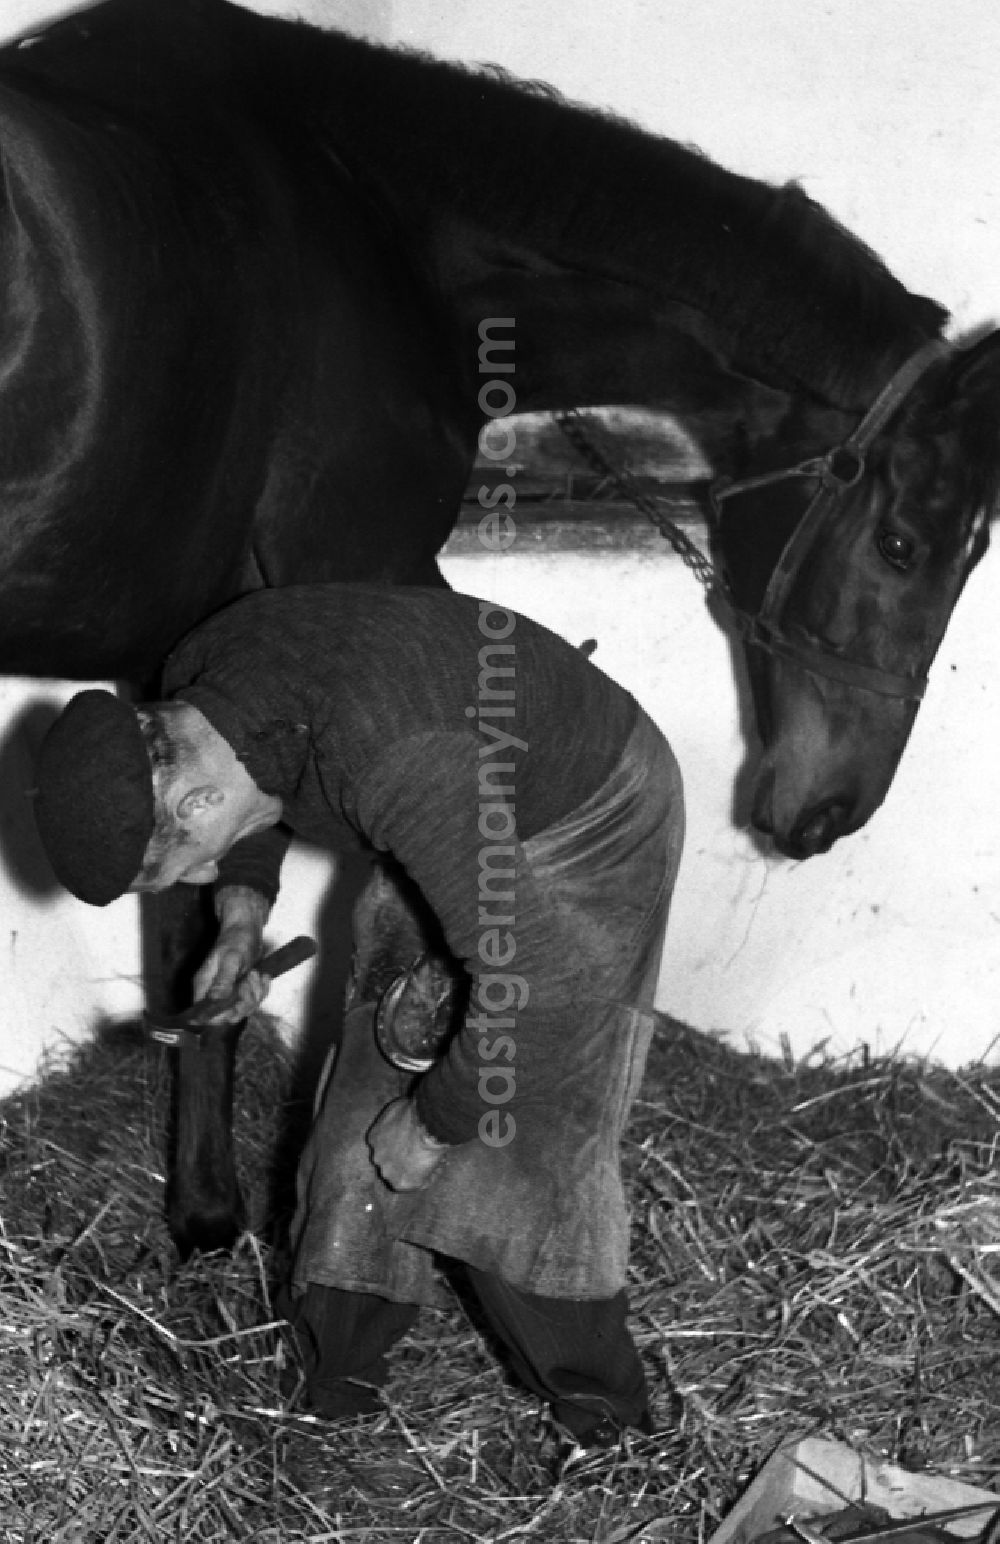 GDR image archive: Dresden - Farrier - Farrier shoeing horses' hooves in Dresden in the state Saxony on the territory of the former GDR, German Democratic Republic